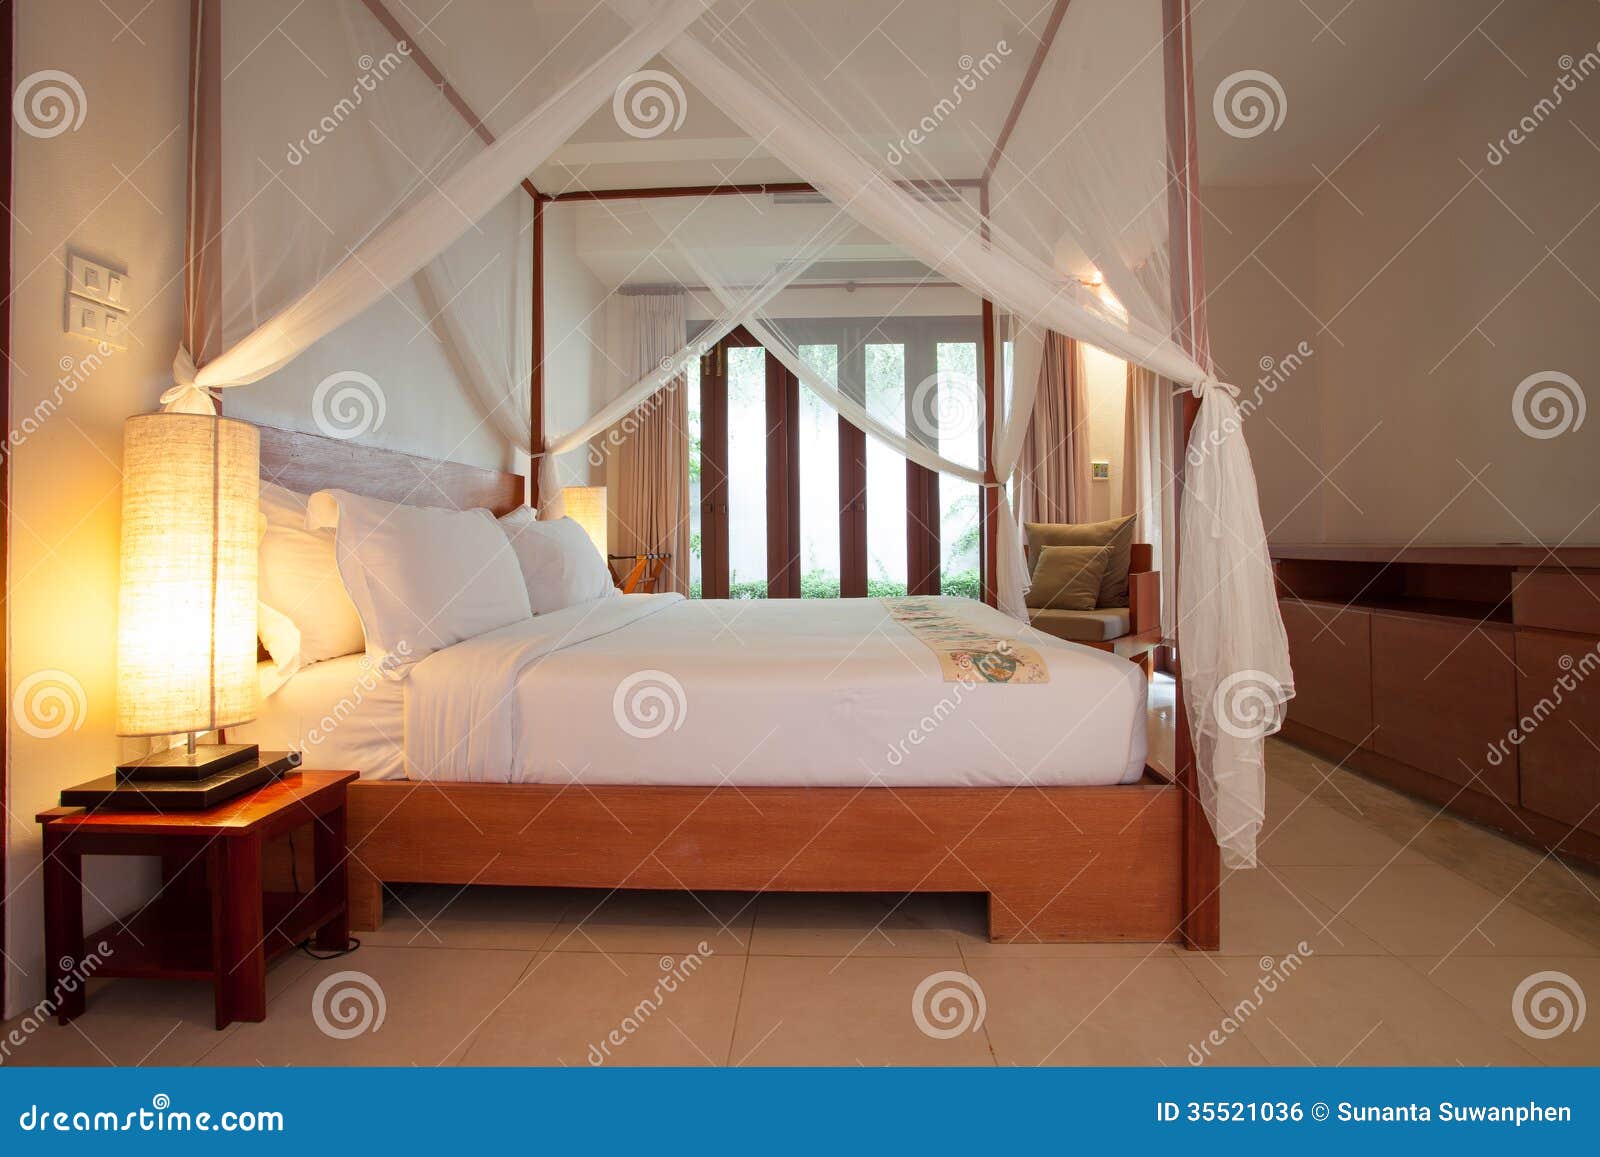 Sleeping Room With Four-poster Bed Stock Photo - Image of 